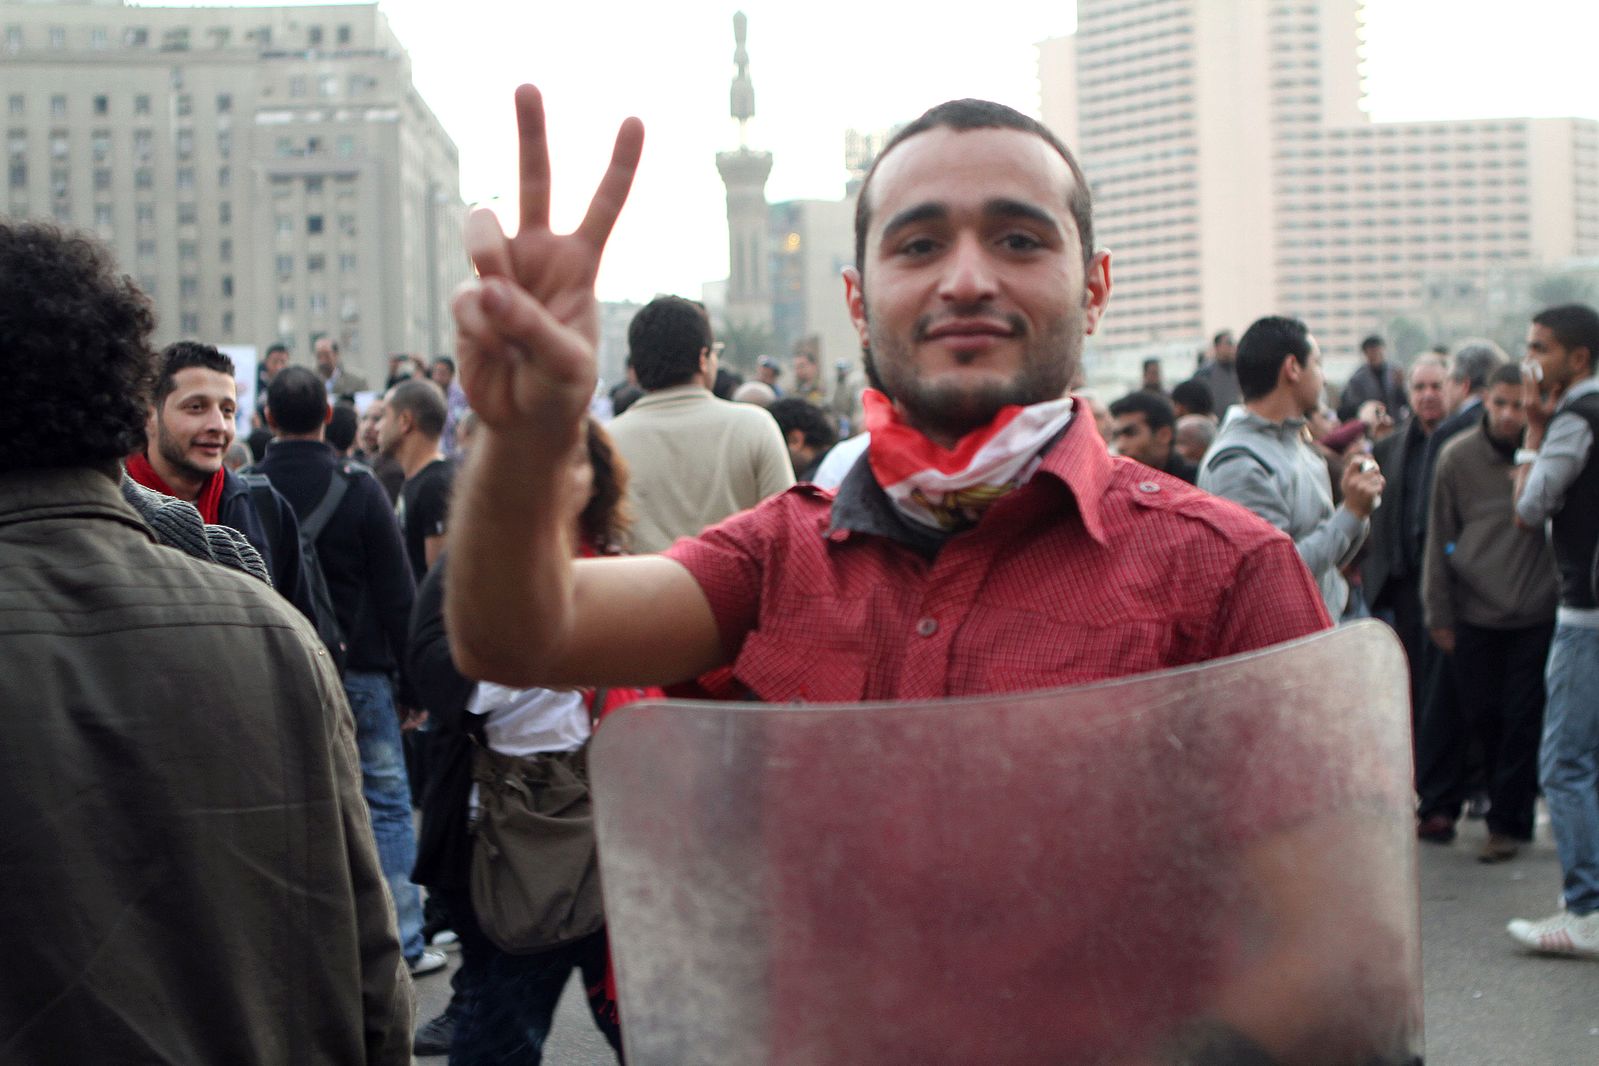 Egypt political activist Ahmed Douma released from prison after nearly 10 years